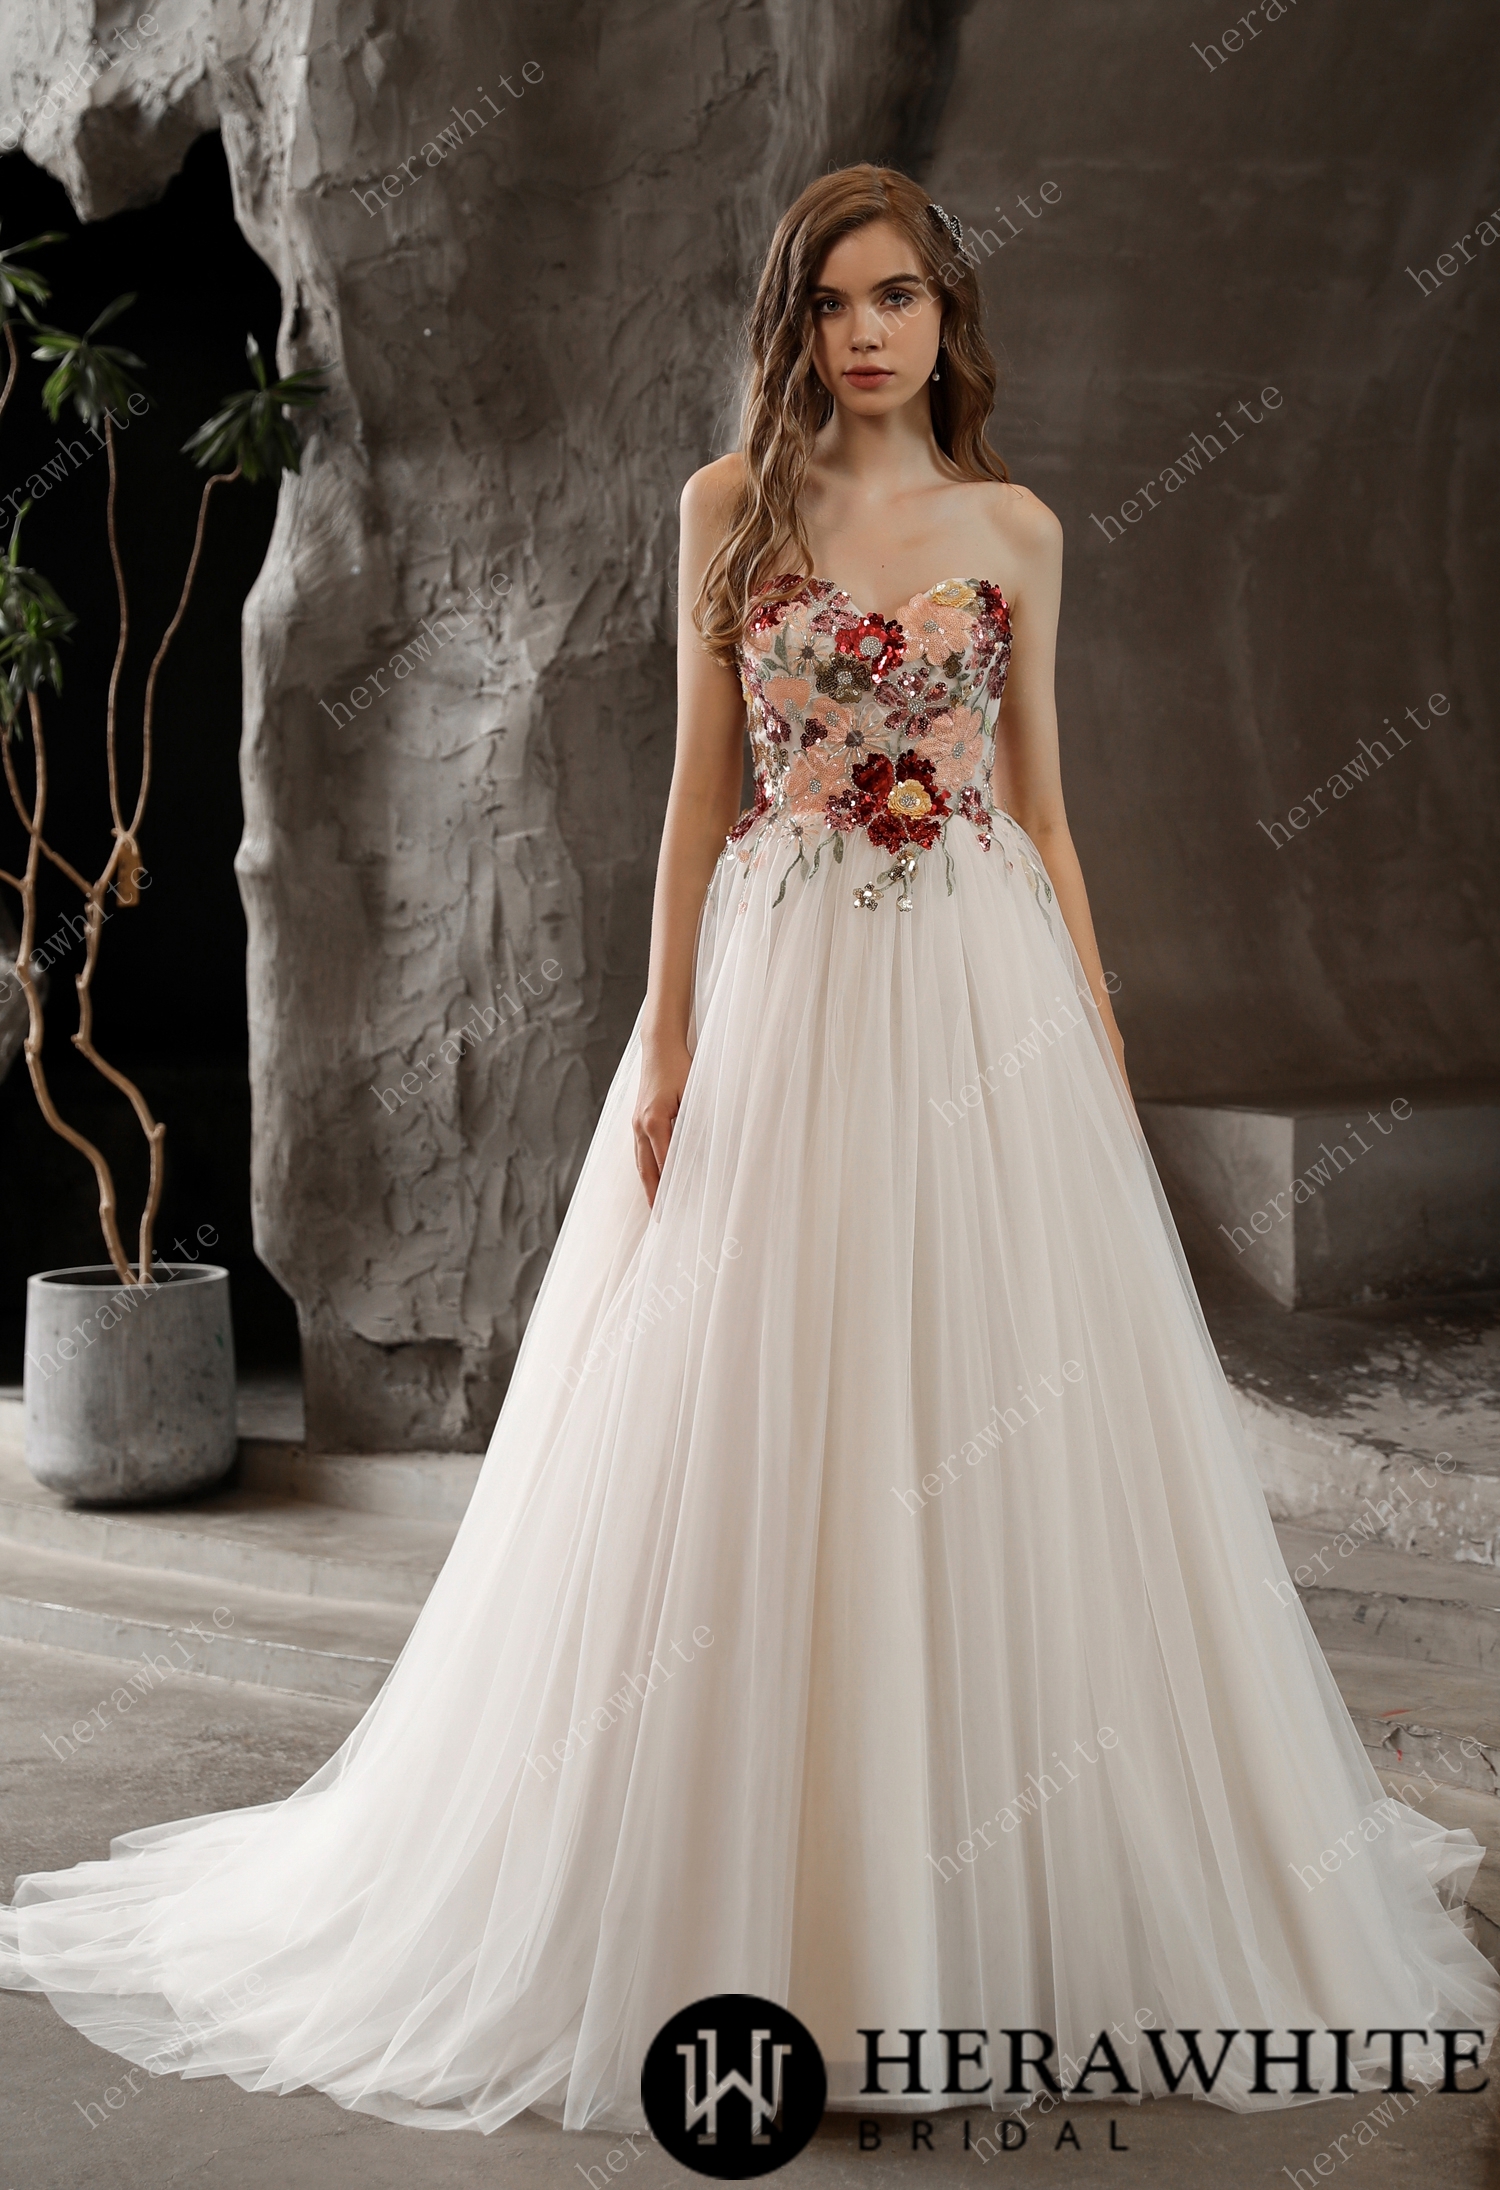 Strapless Princess  Bridal Gown with Tulle Skirt